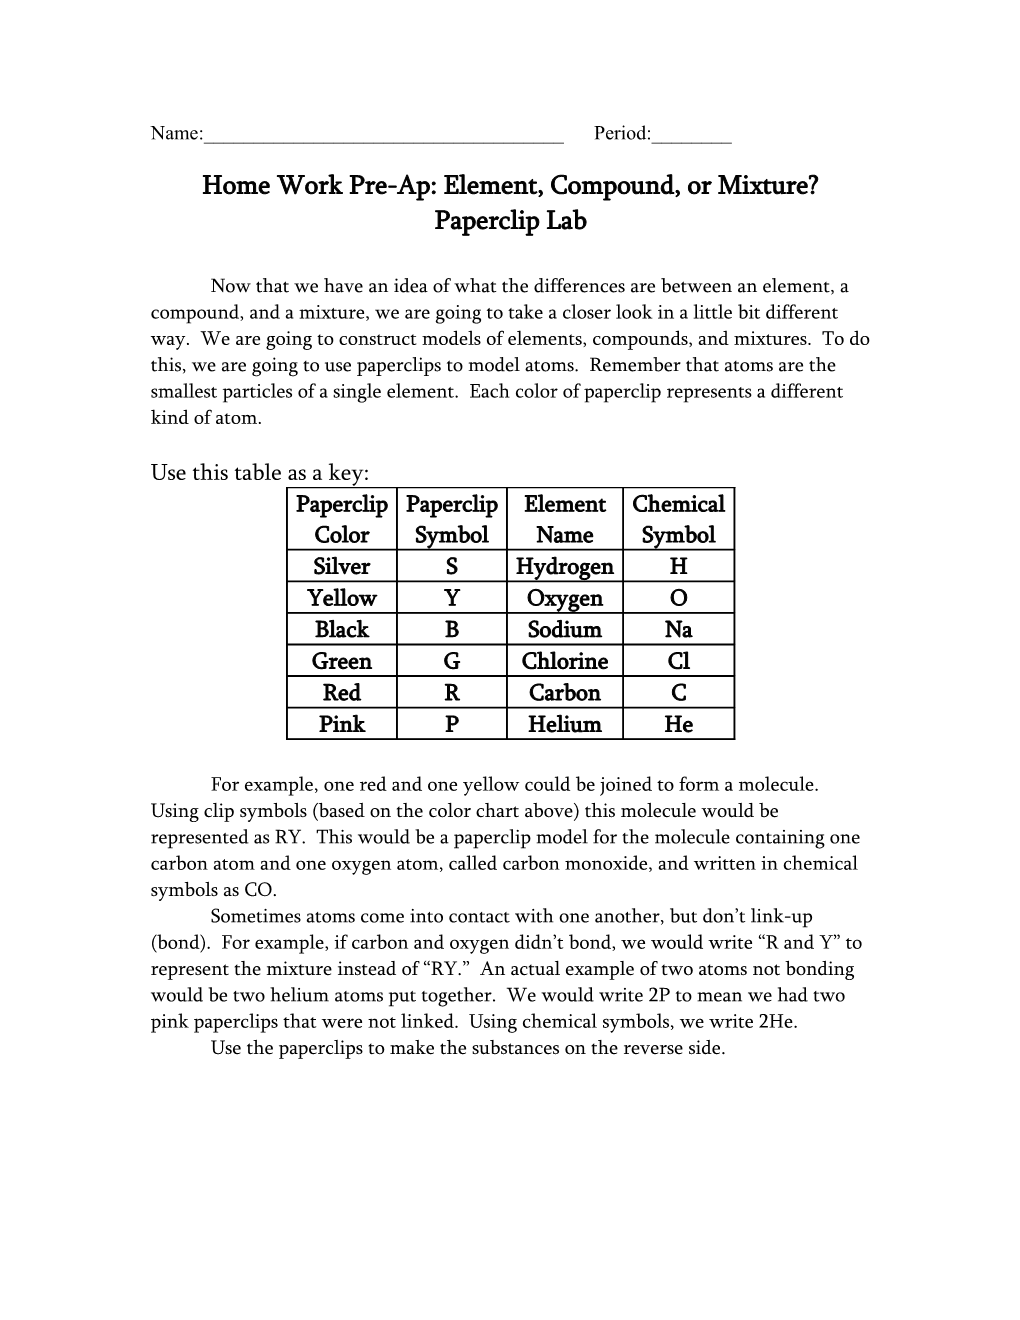 Home Work Pre-Ap: Element, Compound, Or Mixture?